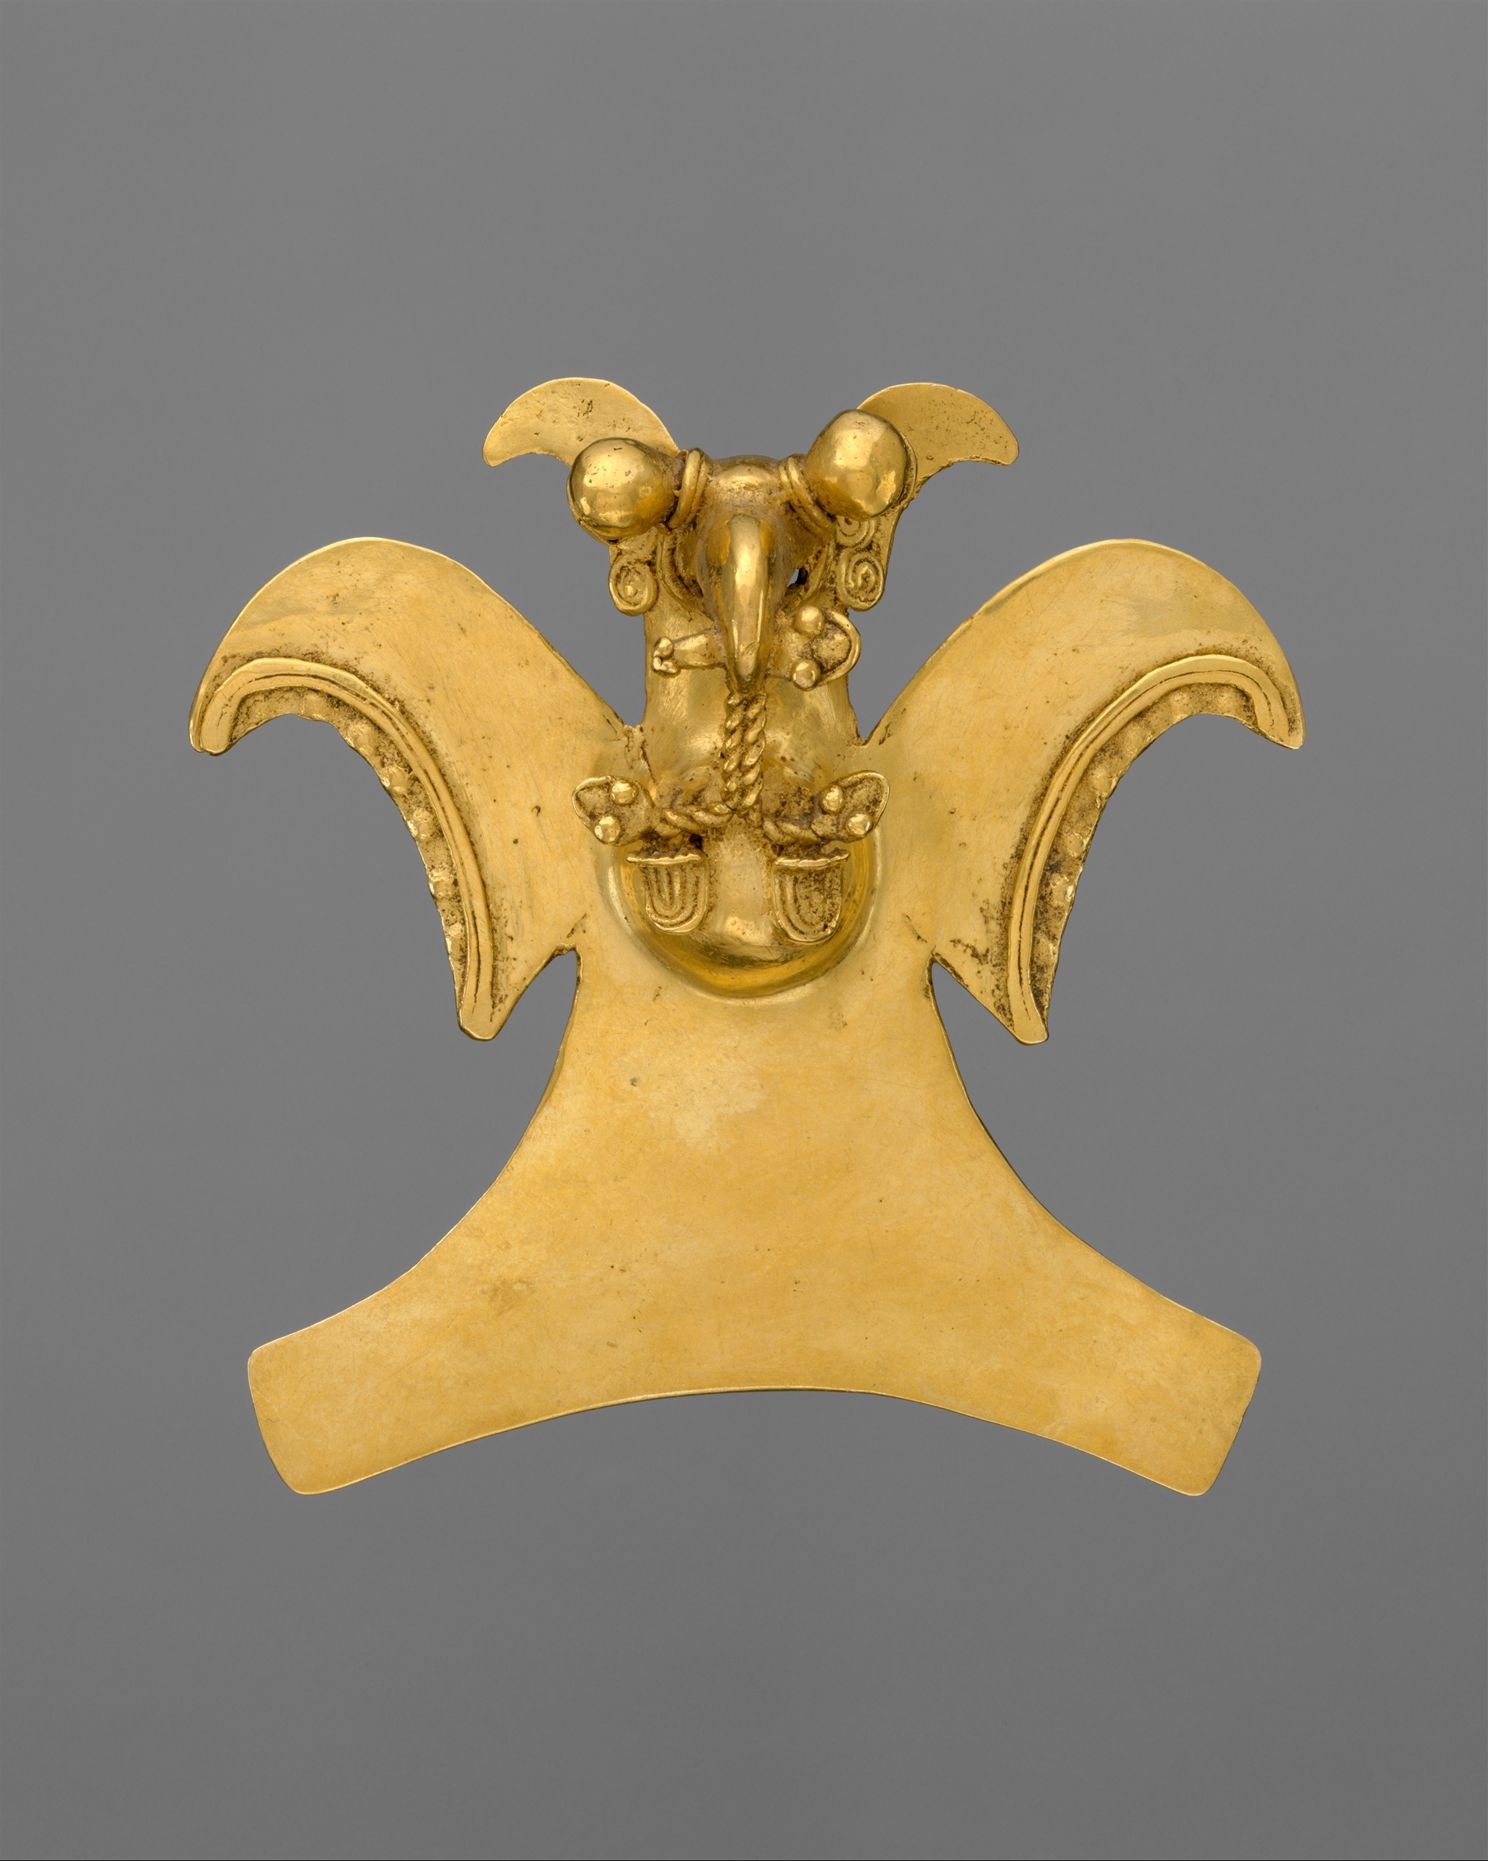 Eagle pendant, Chiriquí, 800-1519 A.D. Bird pendants like this one were first noted by Christopher Columbus, who dubed them aguilas (after the Roman version he was familiar with). Metropolitan Museum of Art.